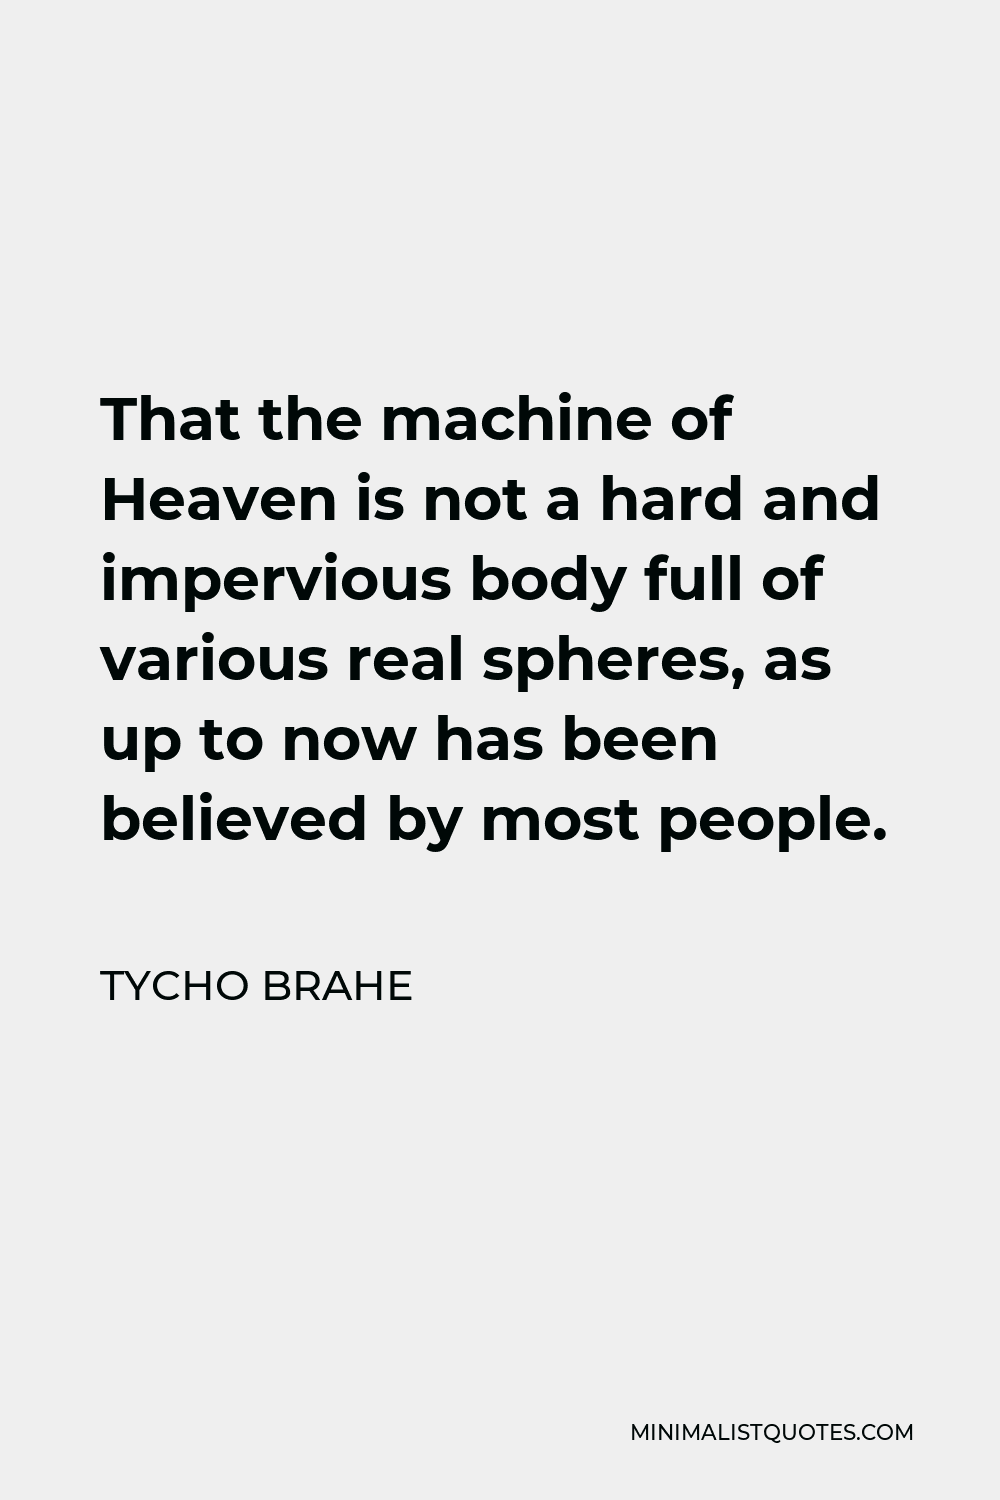 Tycho Brahe Quote - That the machine of Heaven is not a hard and impervious body full of various real spheres, as up to now has been believed by most people.